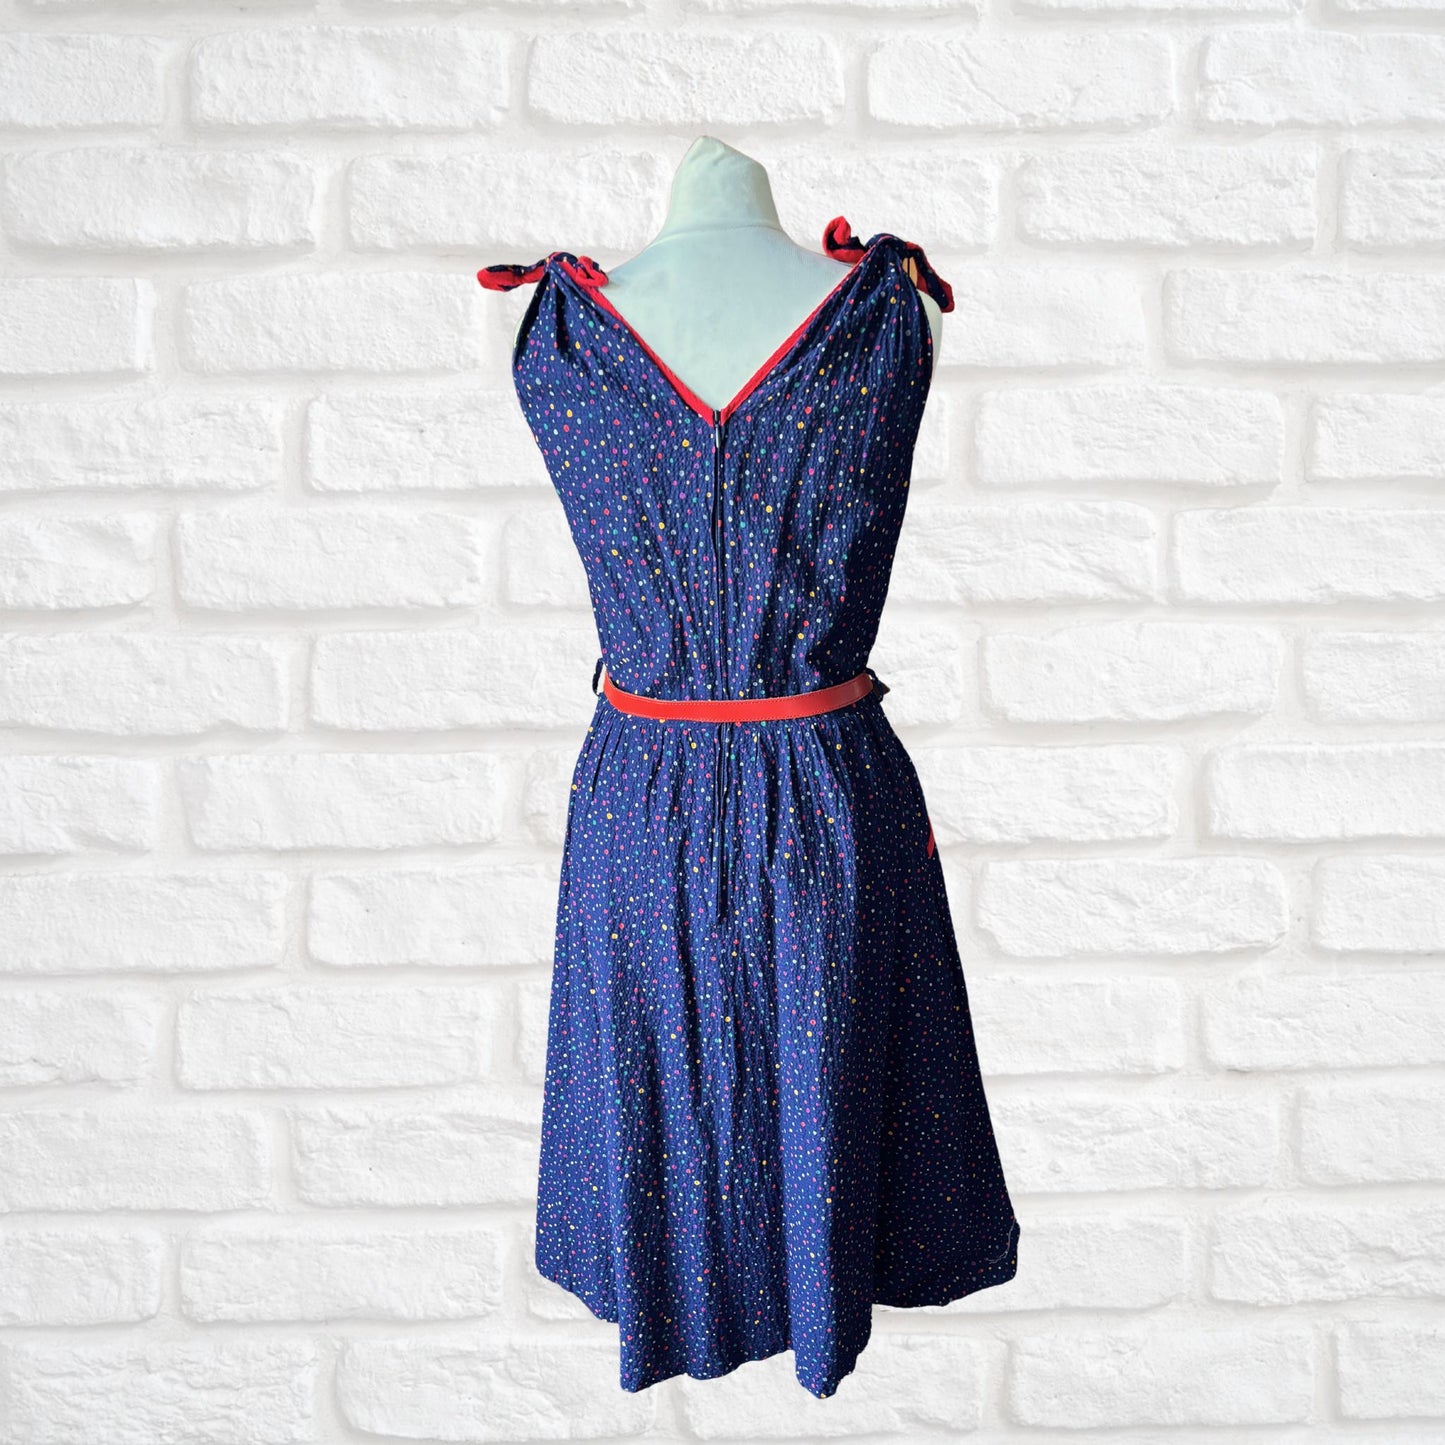 70s dark blue and rainbow polka dot sundress with red trim and belt. Approx UK size 10- 12